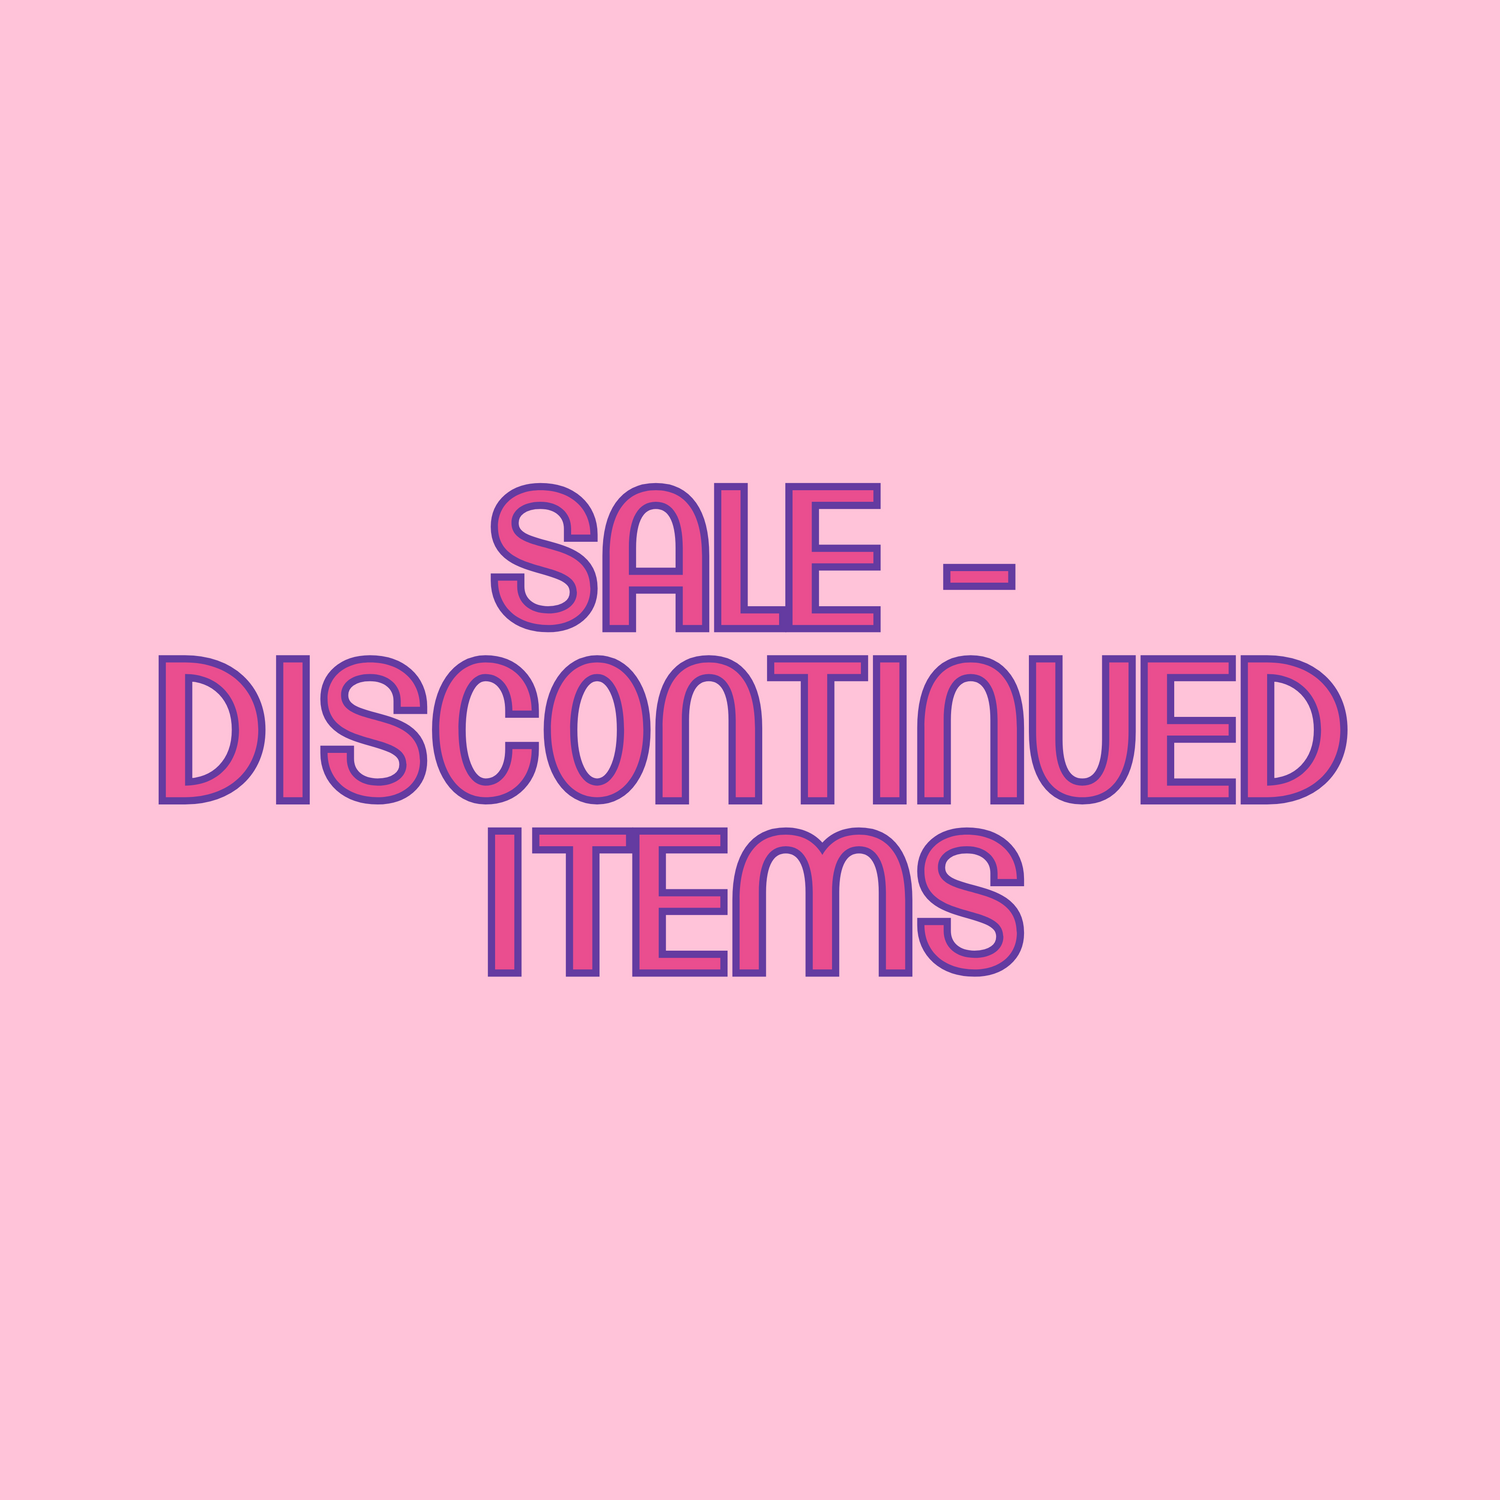 Sale - Discontinued Items